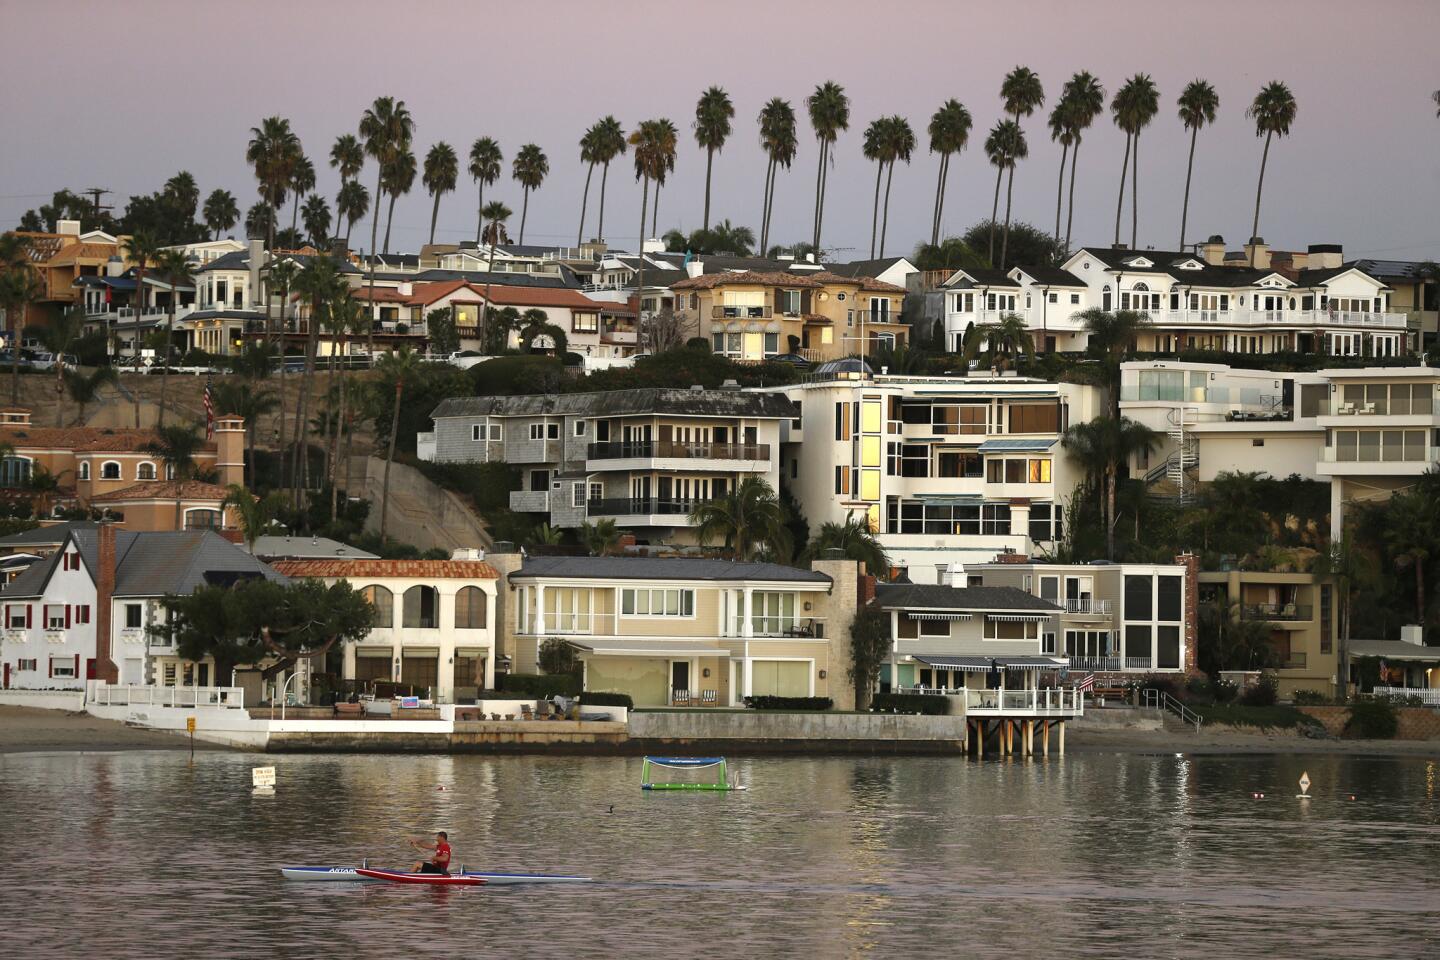 A kayaker cruises cruises through Newport Harbor on election day in Newport Beach.